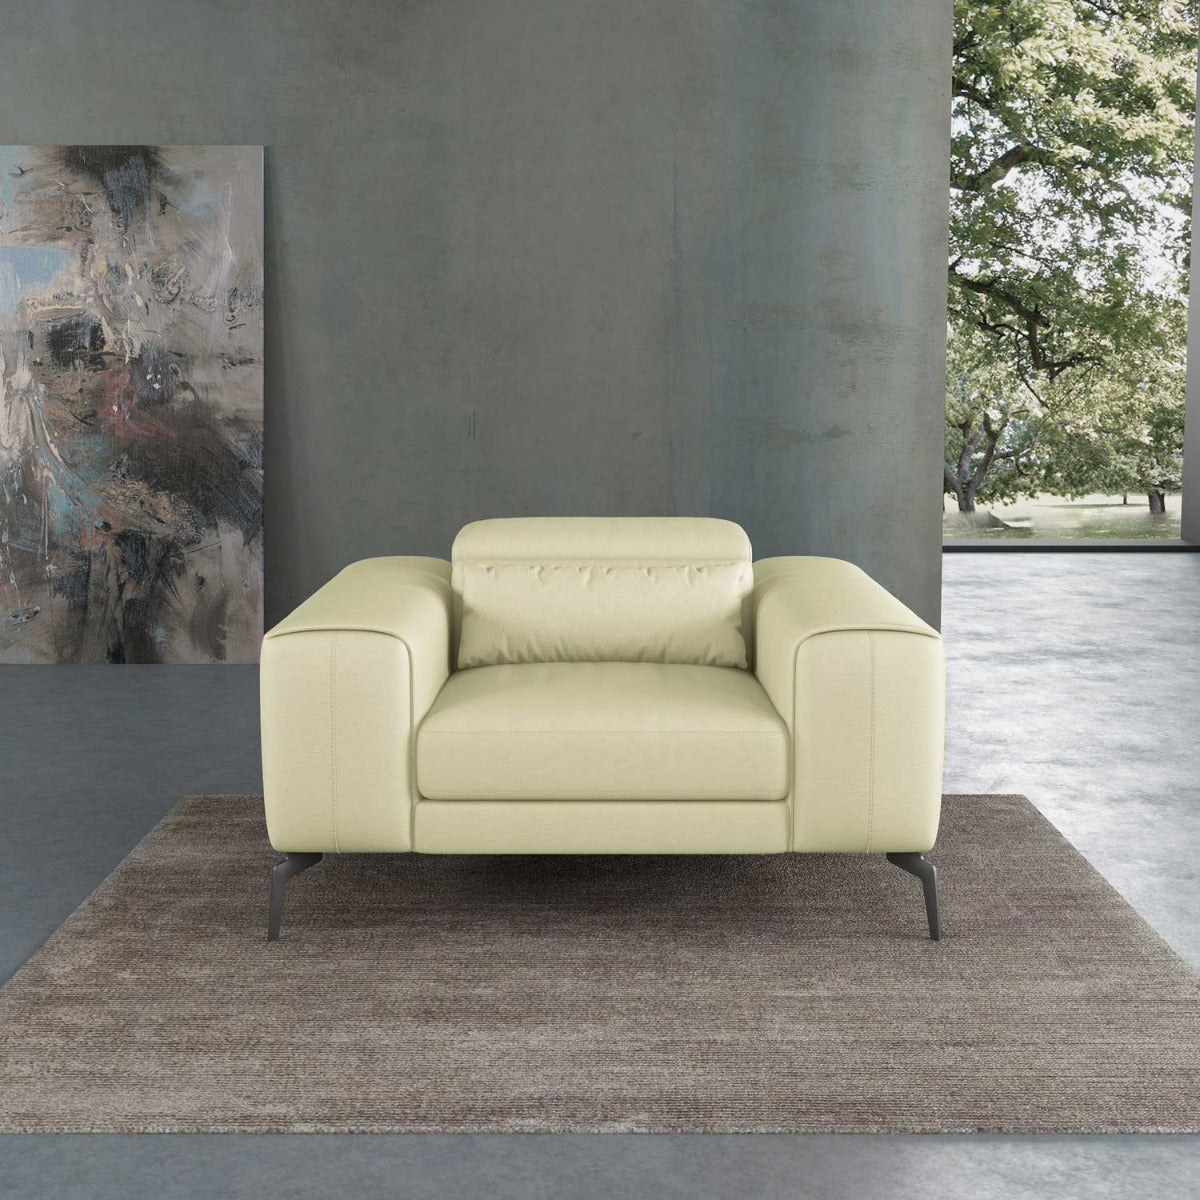 European Furniture - Cavour Chair in Off Whte - 12552-C - New Star Living